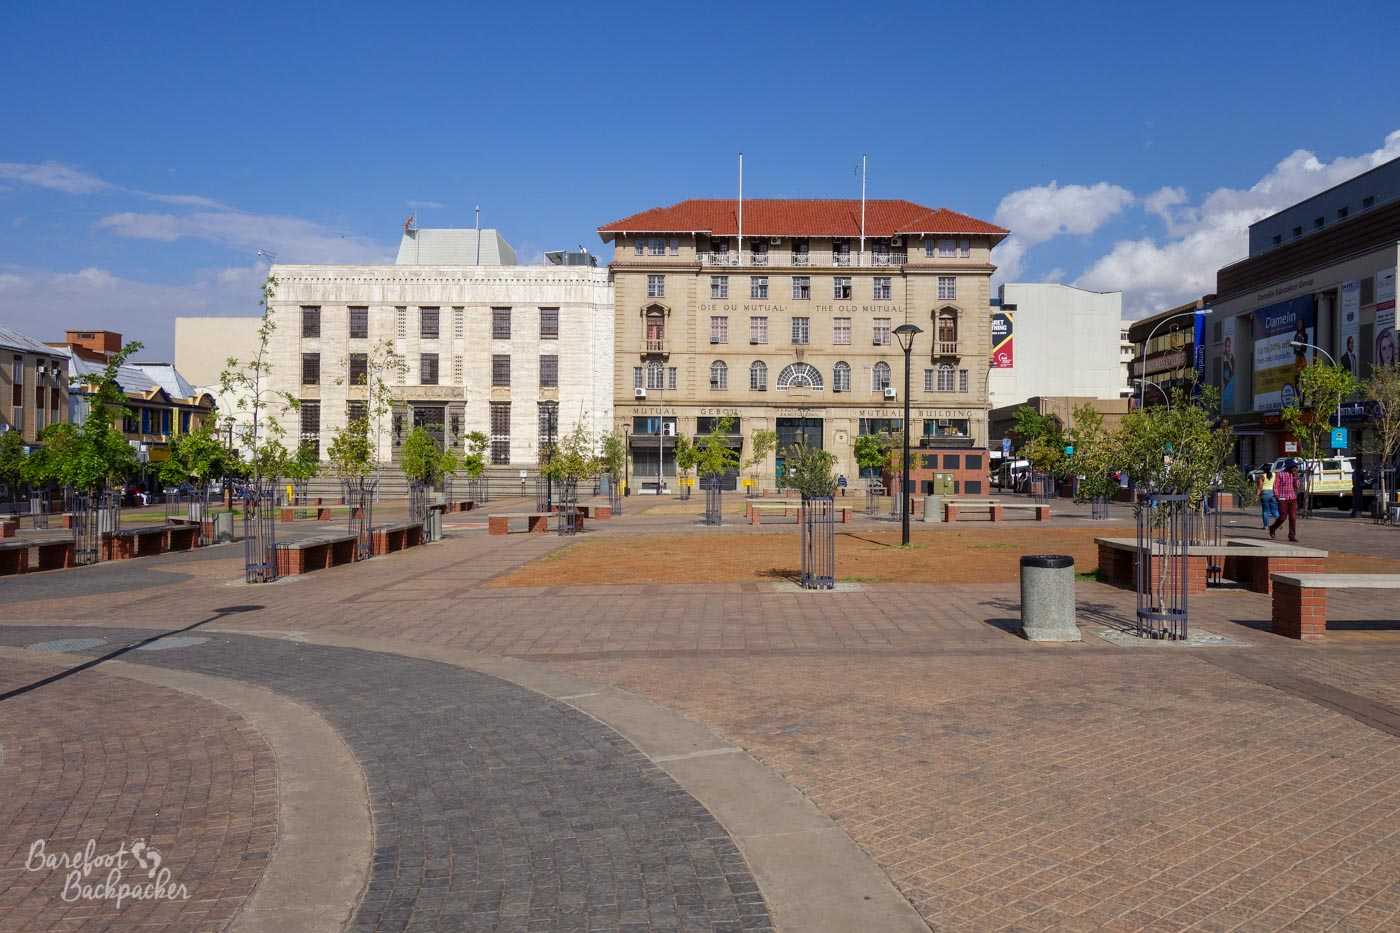 The main square in the centre of Bloemfontein